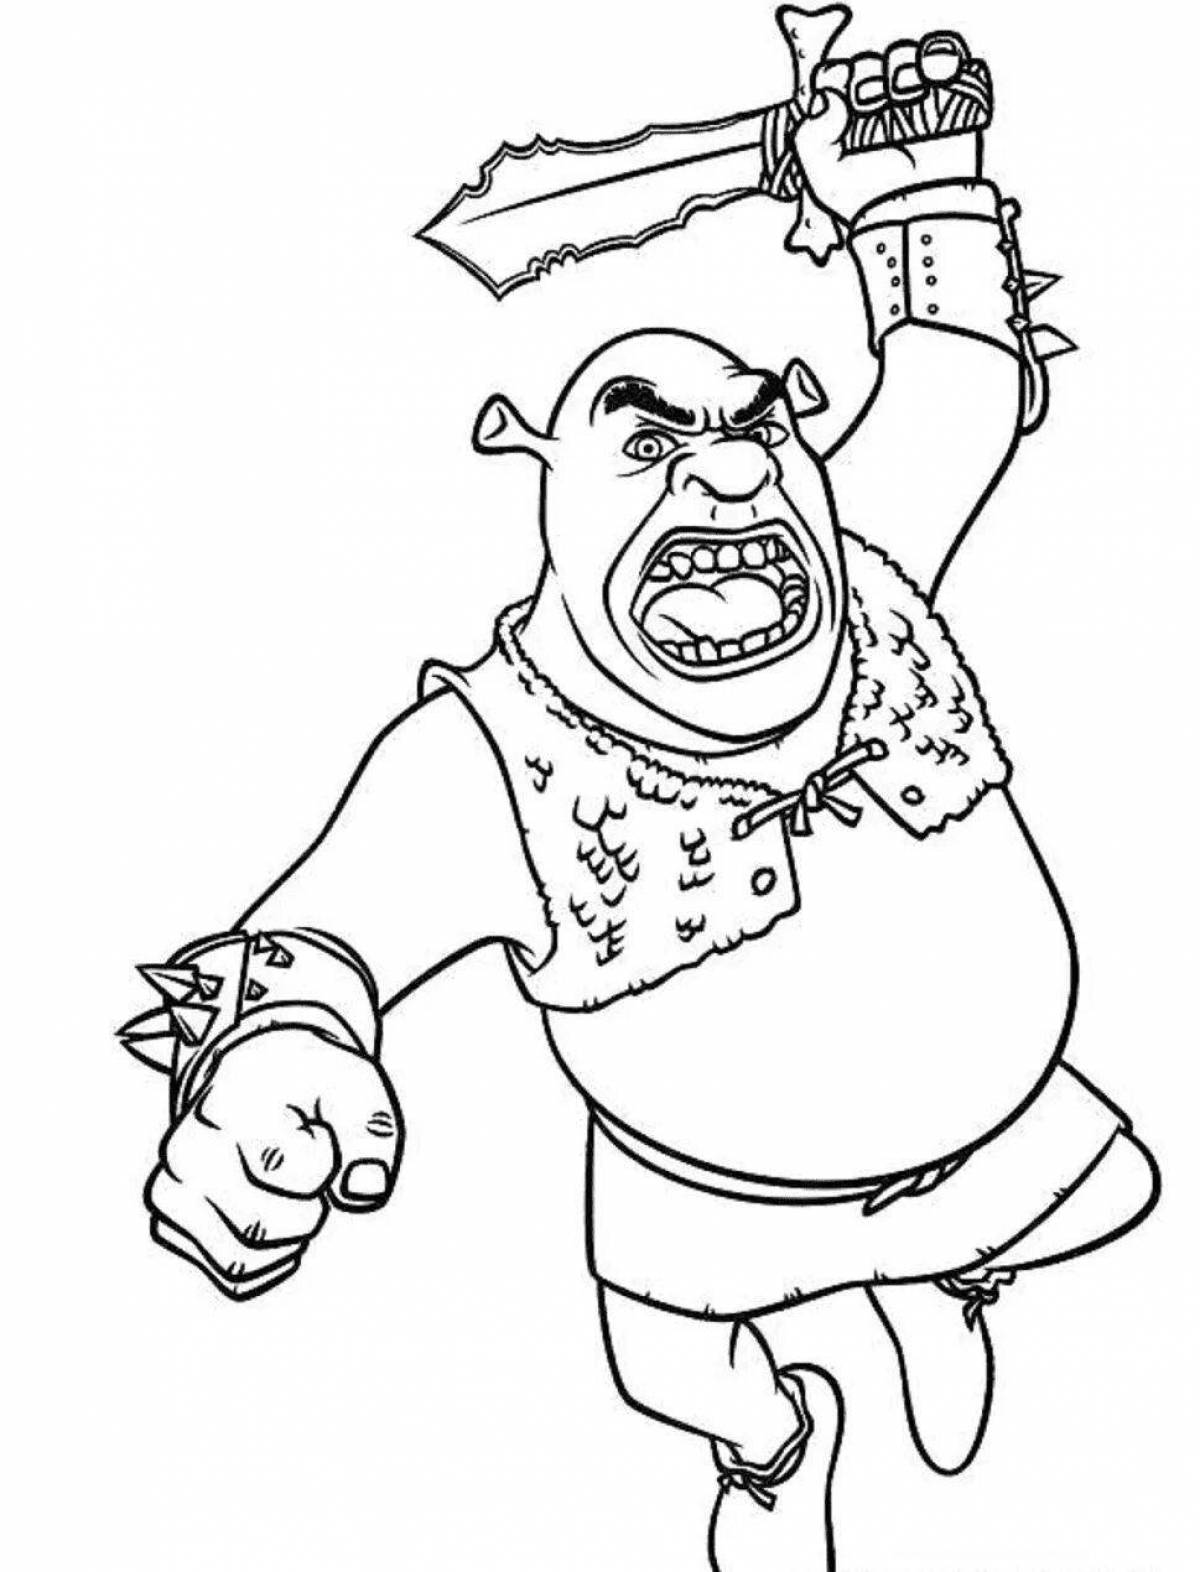 Grand coloring page shrek face